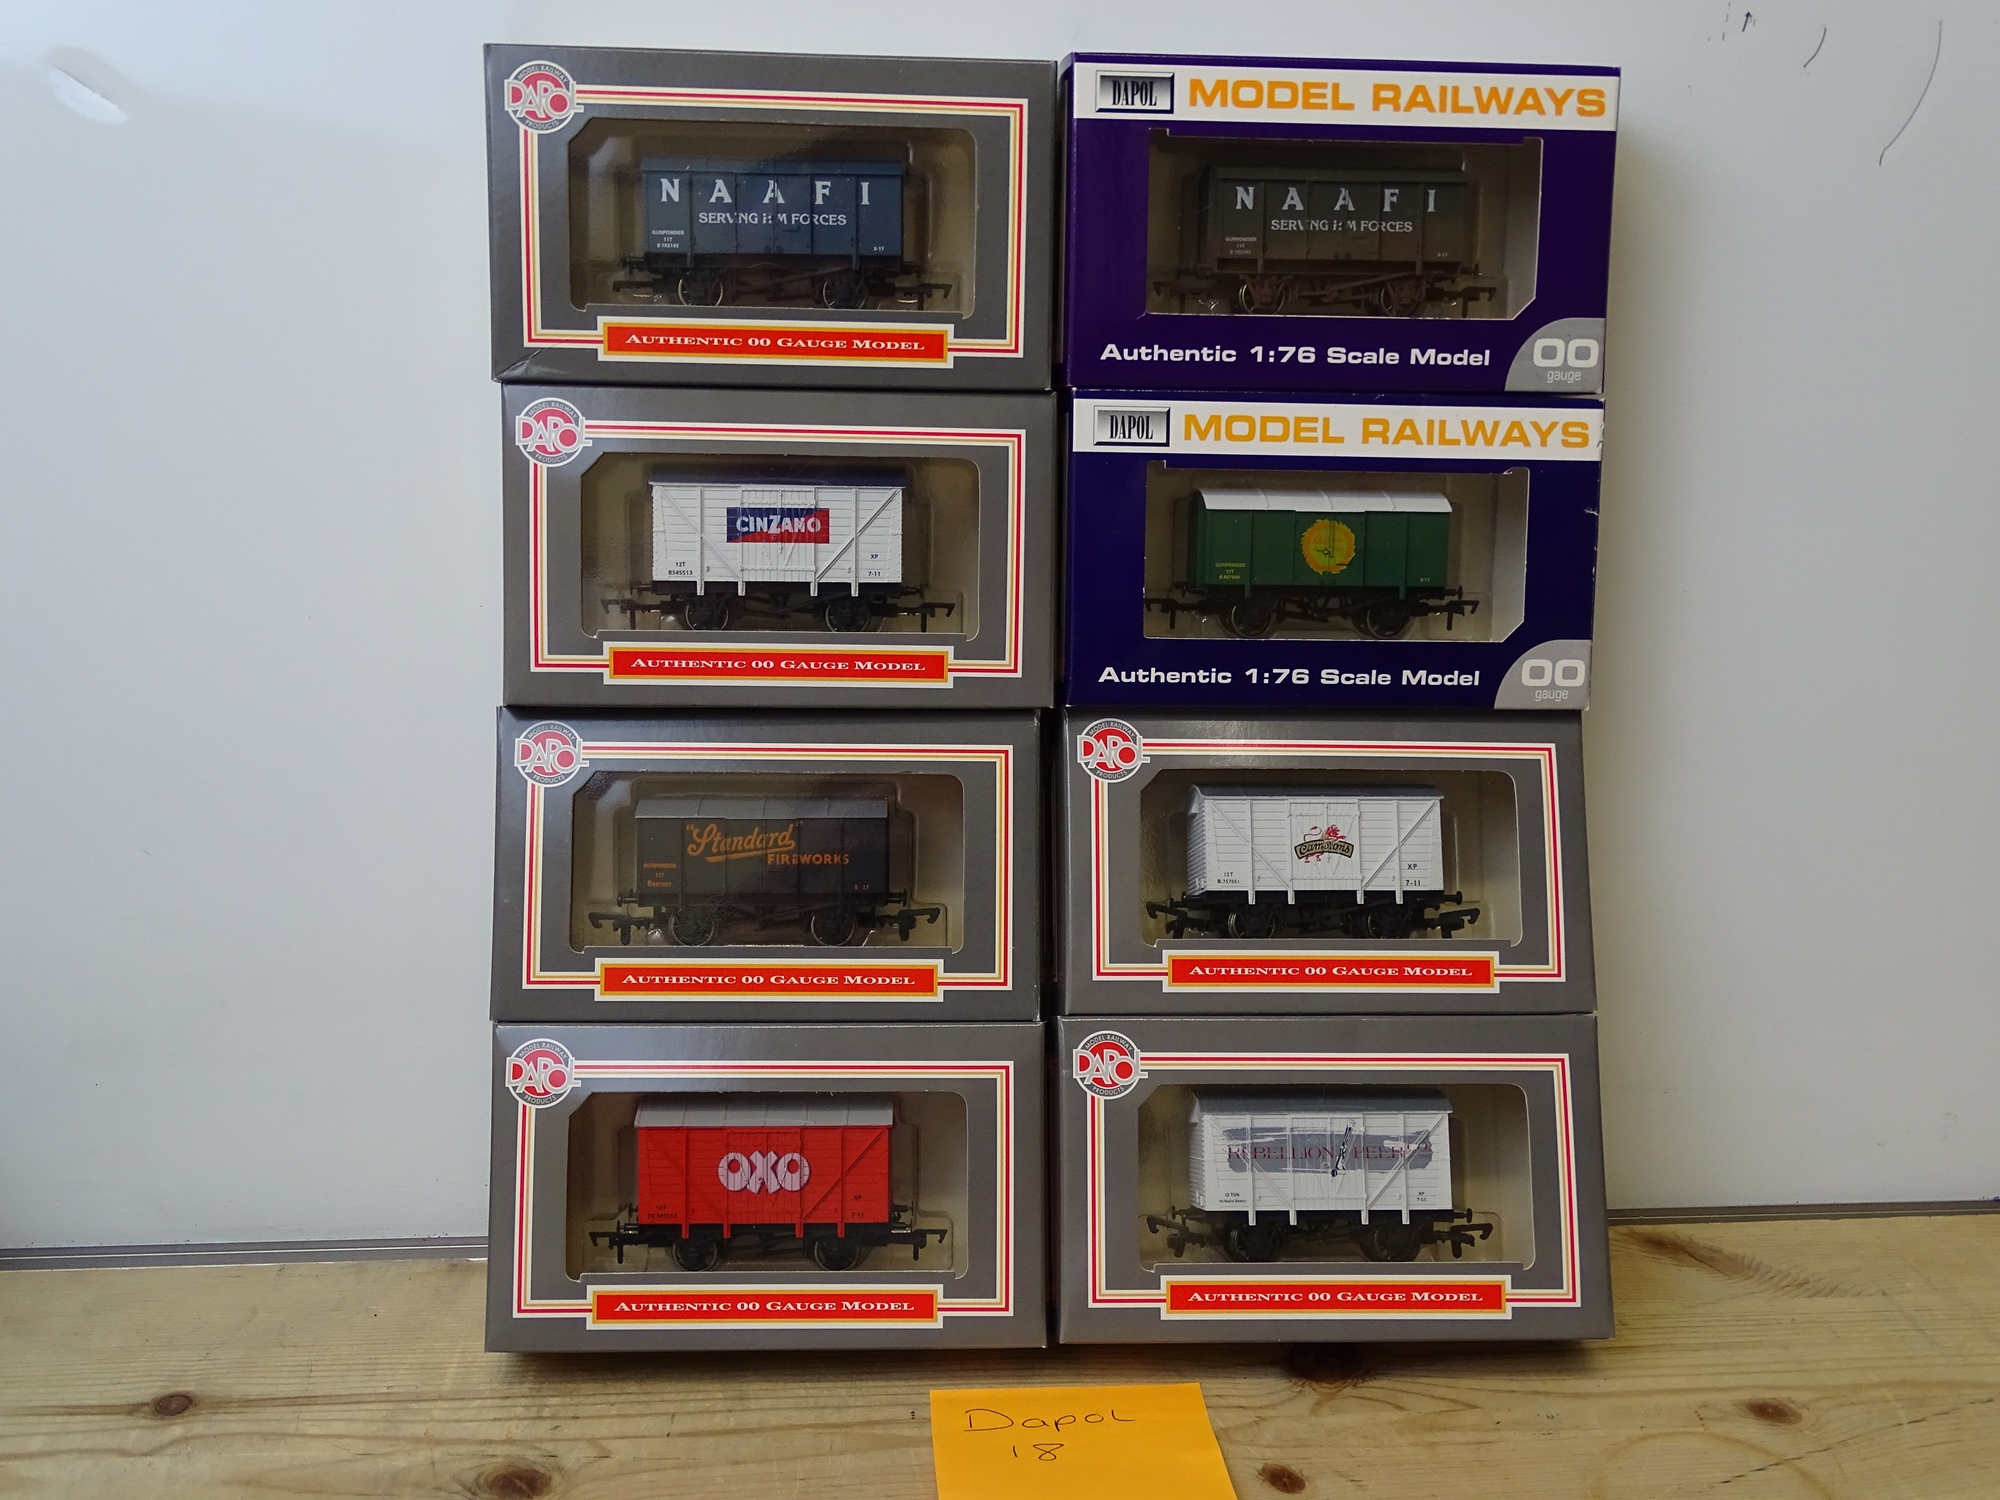 OO GAUGE MODEL RAILWAYS: A group of boxed DAPOL wagons - all WRENN Collectors' Club limited editions